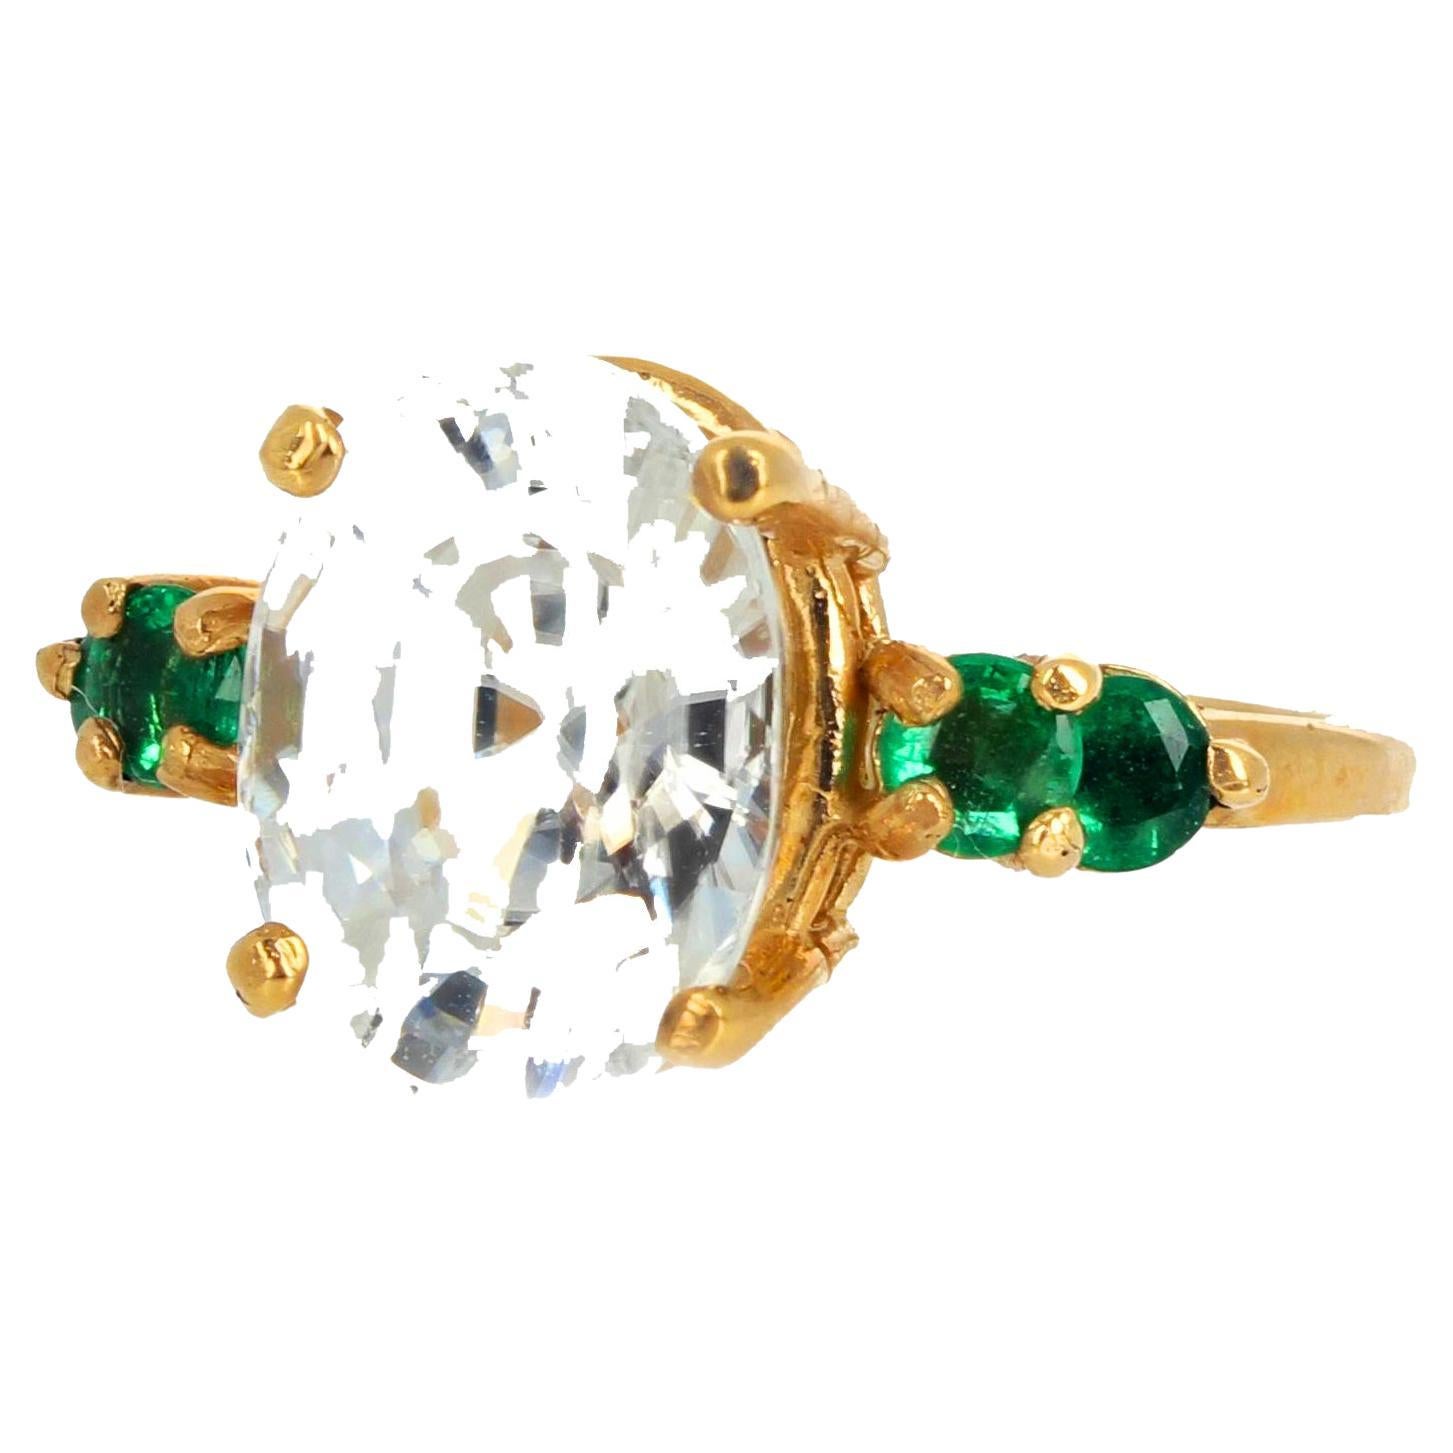 Brilliant 4 carat natural White Zircon (11.5 mm x 8.5 mm) enhanced with 4 glittering natural green emeralds (approximately 0.48 carats - 3.2mm each) set in this lovely 10K yellow gold ring size 7 (sizable for free).  Look at all the photos to see